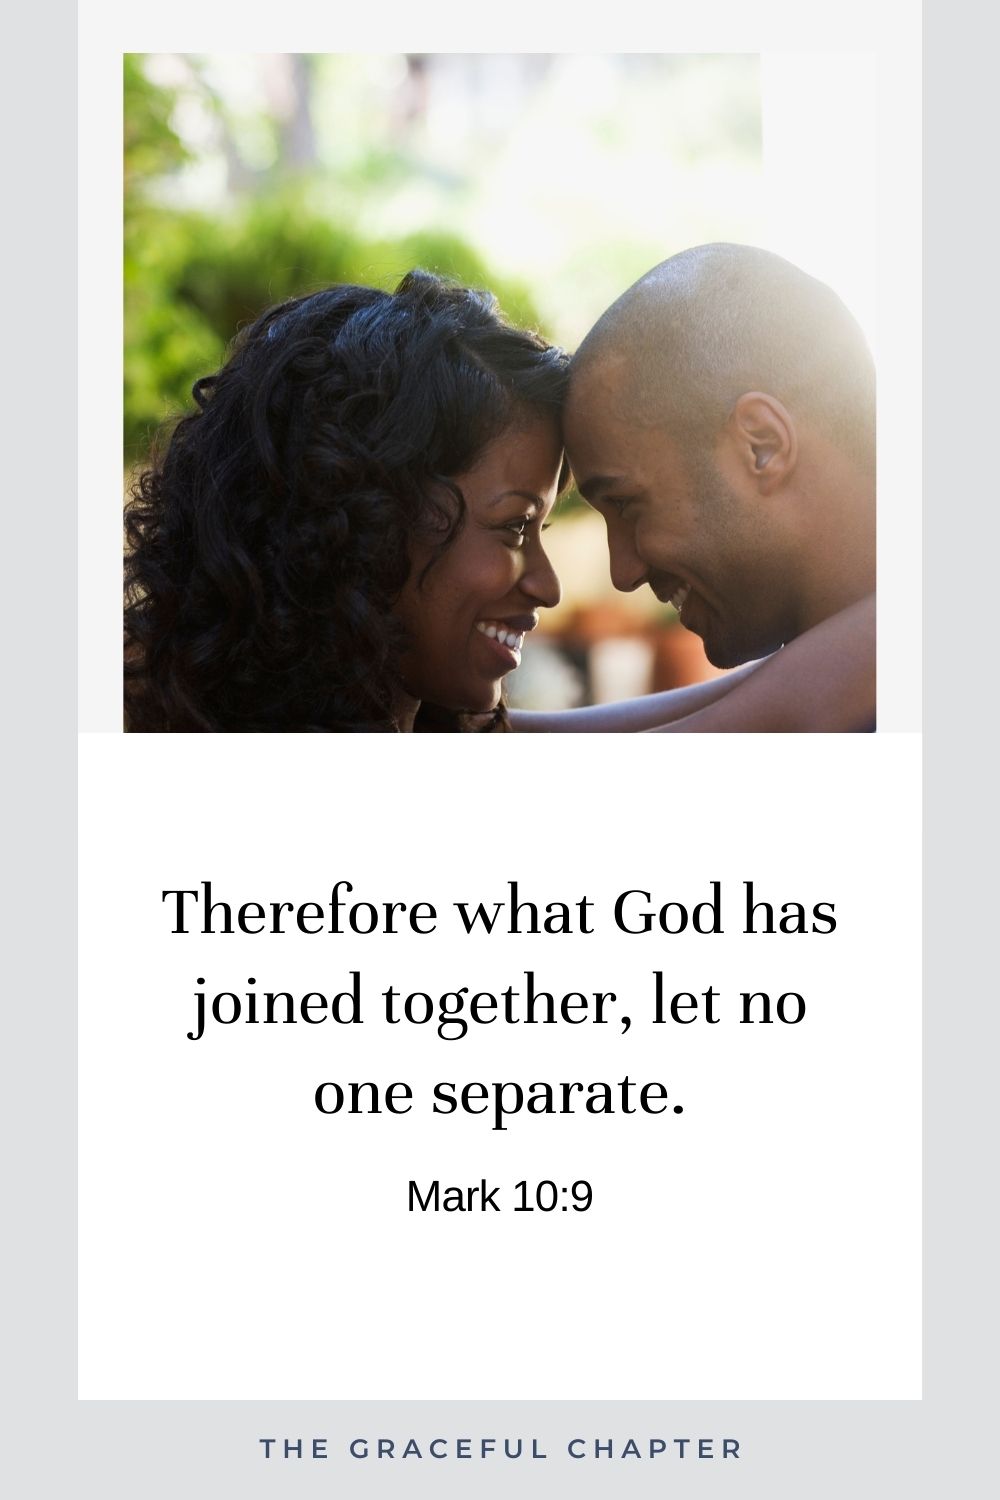 Therefore what God has joined together, let no one separate. Mark 10:9